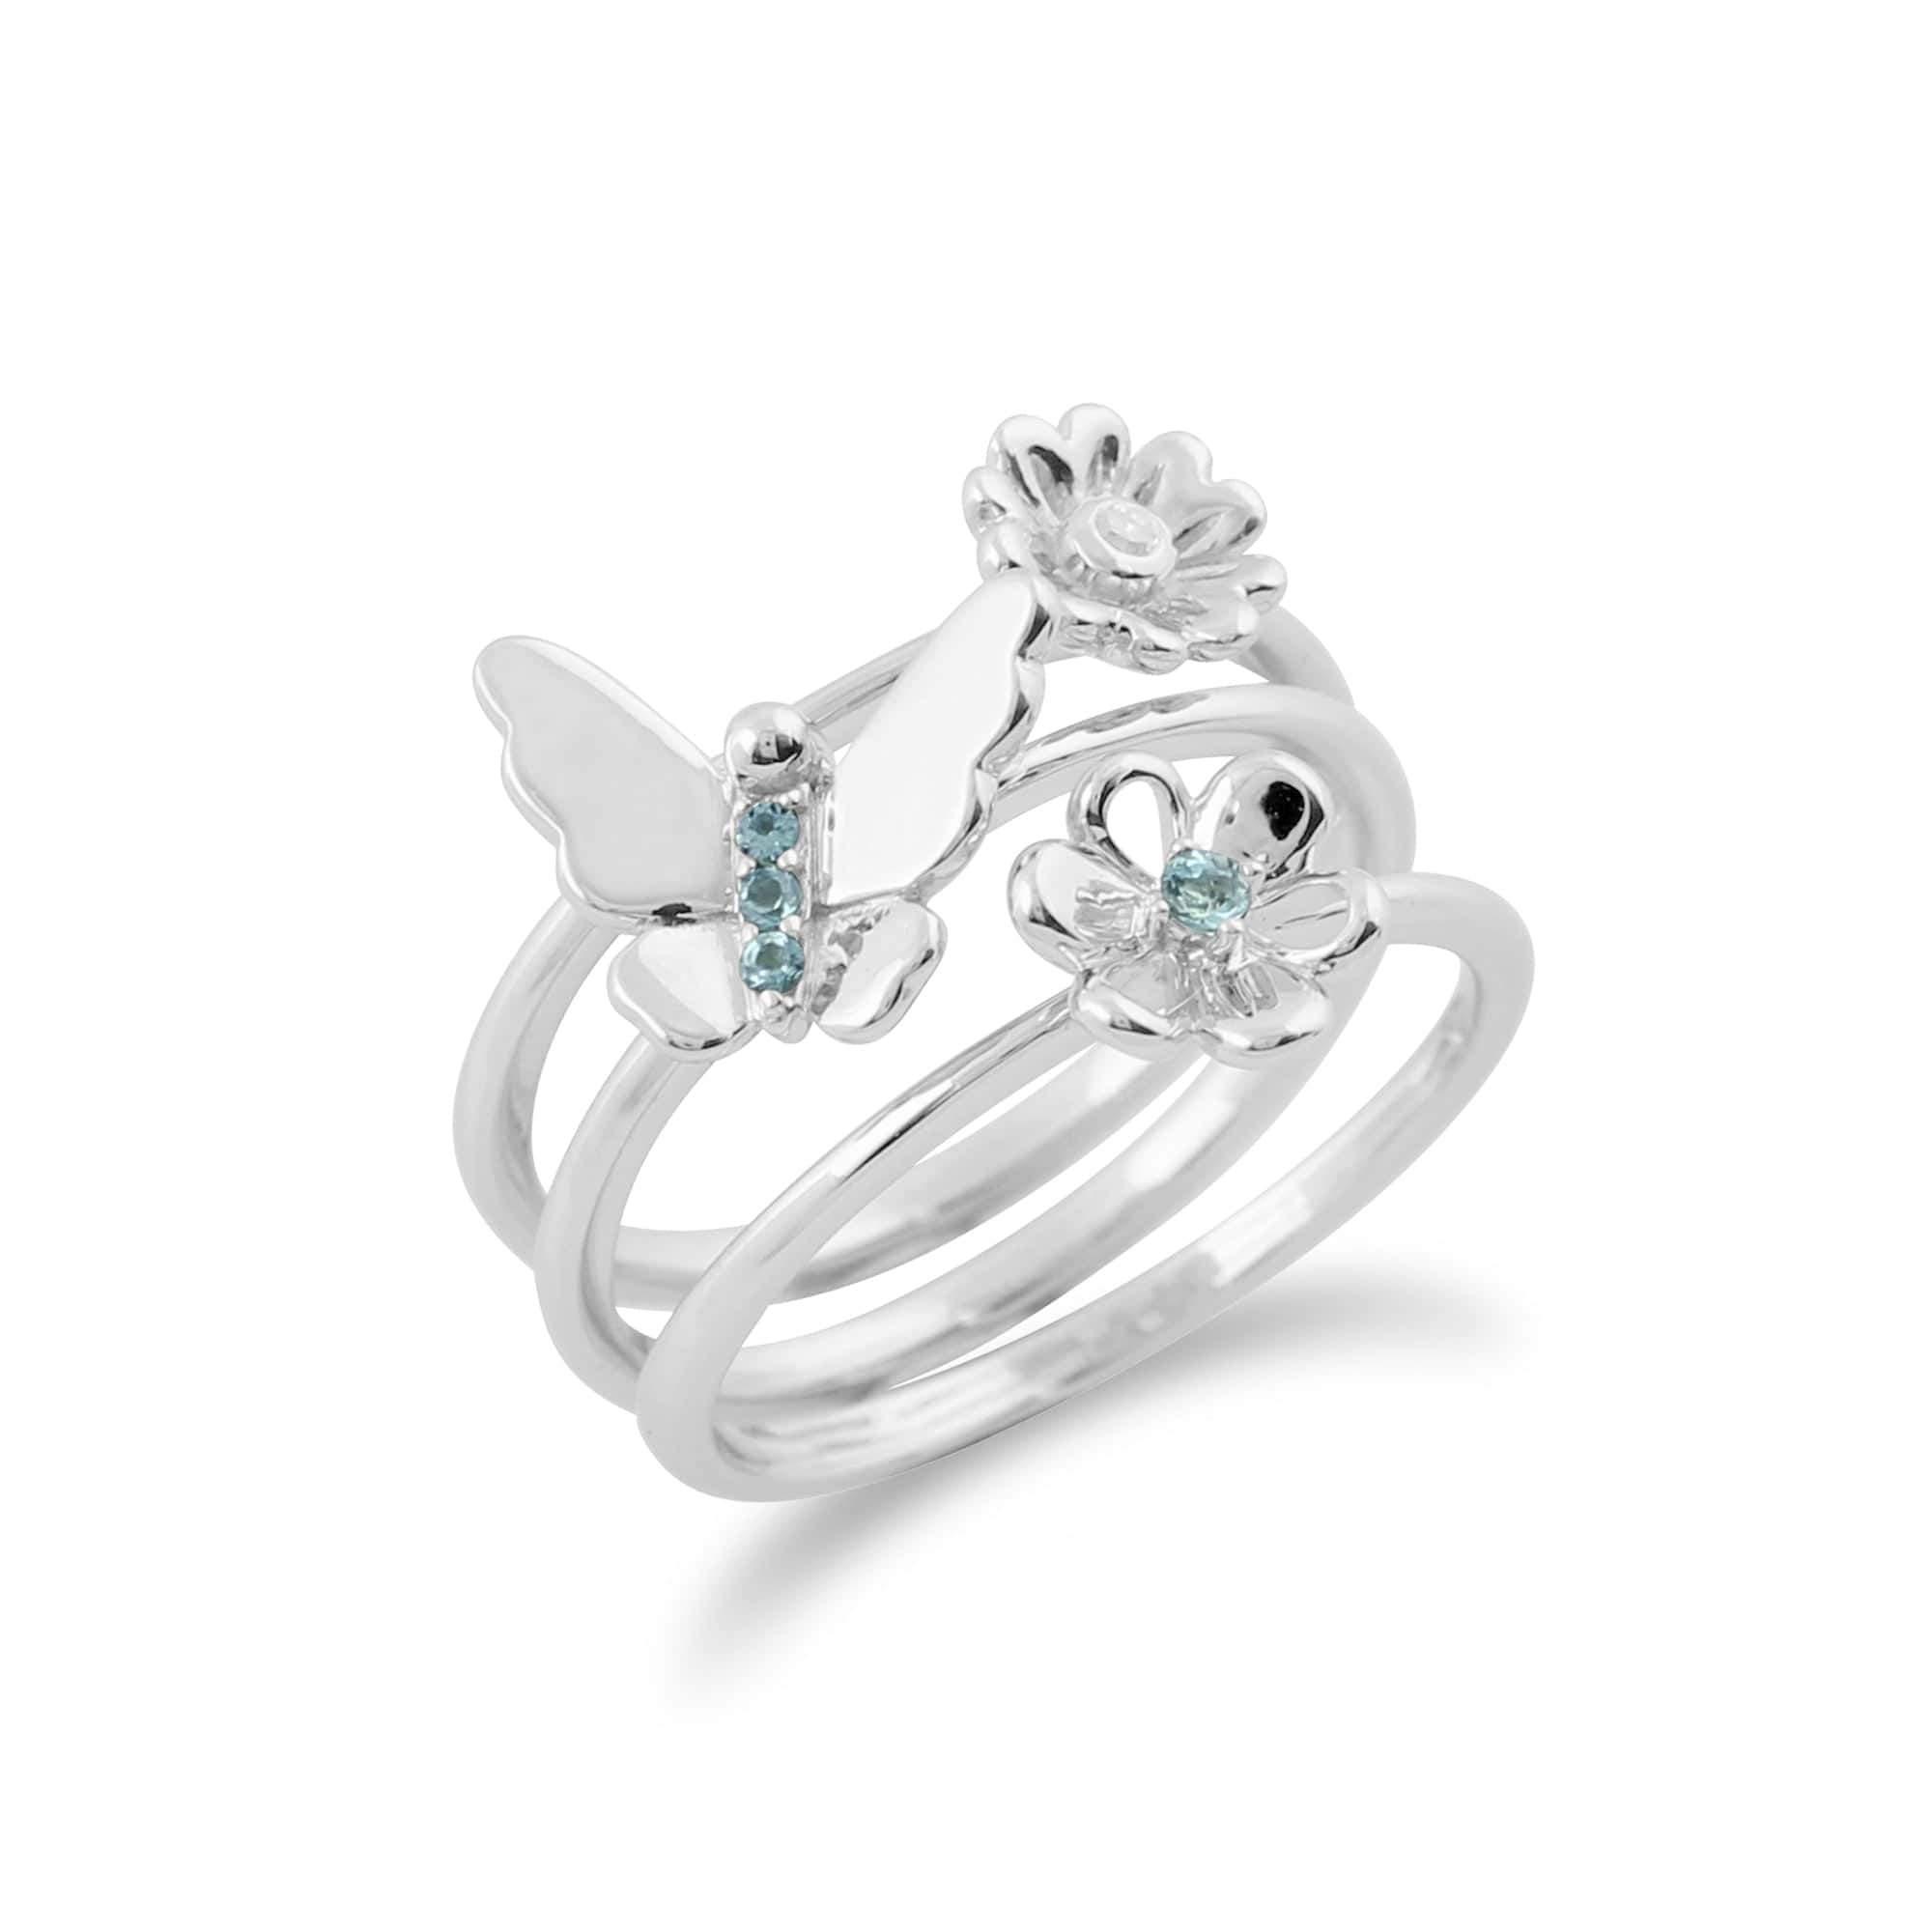 162R0159019-162R0158019-162R0157019 Floral Round Blue Topaz & Diamond Butterfly and Flowers Three Stack Ring Set in 9ct White Gold 2